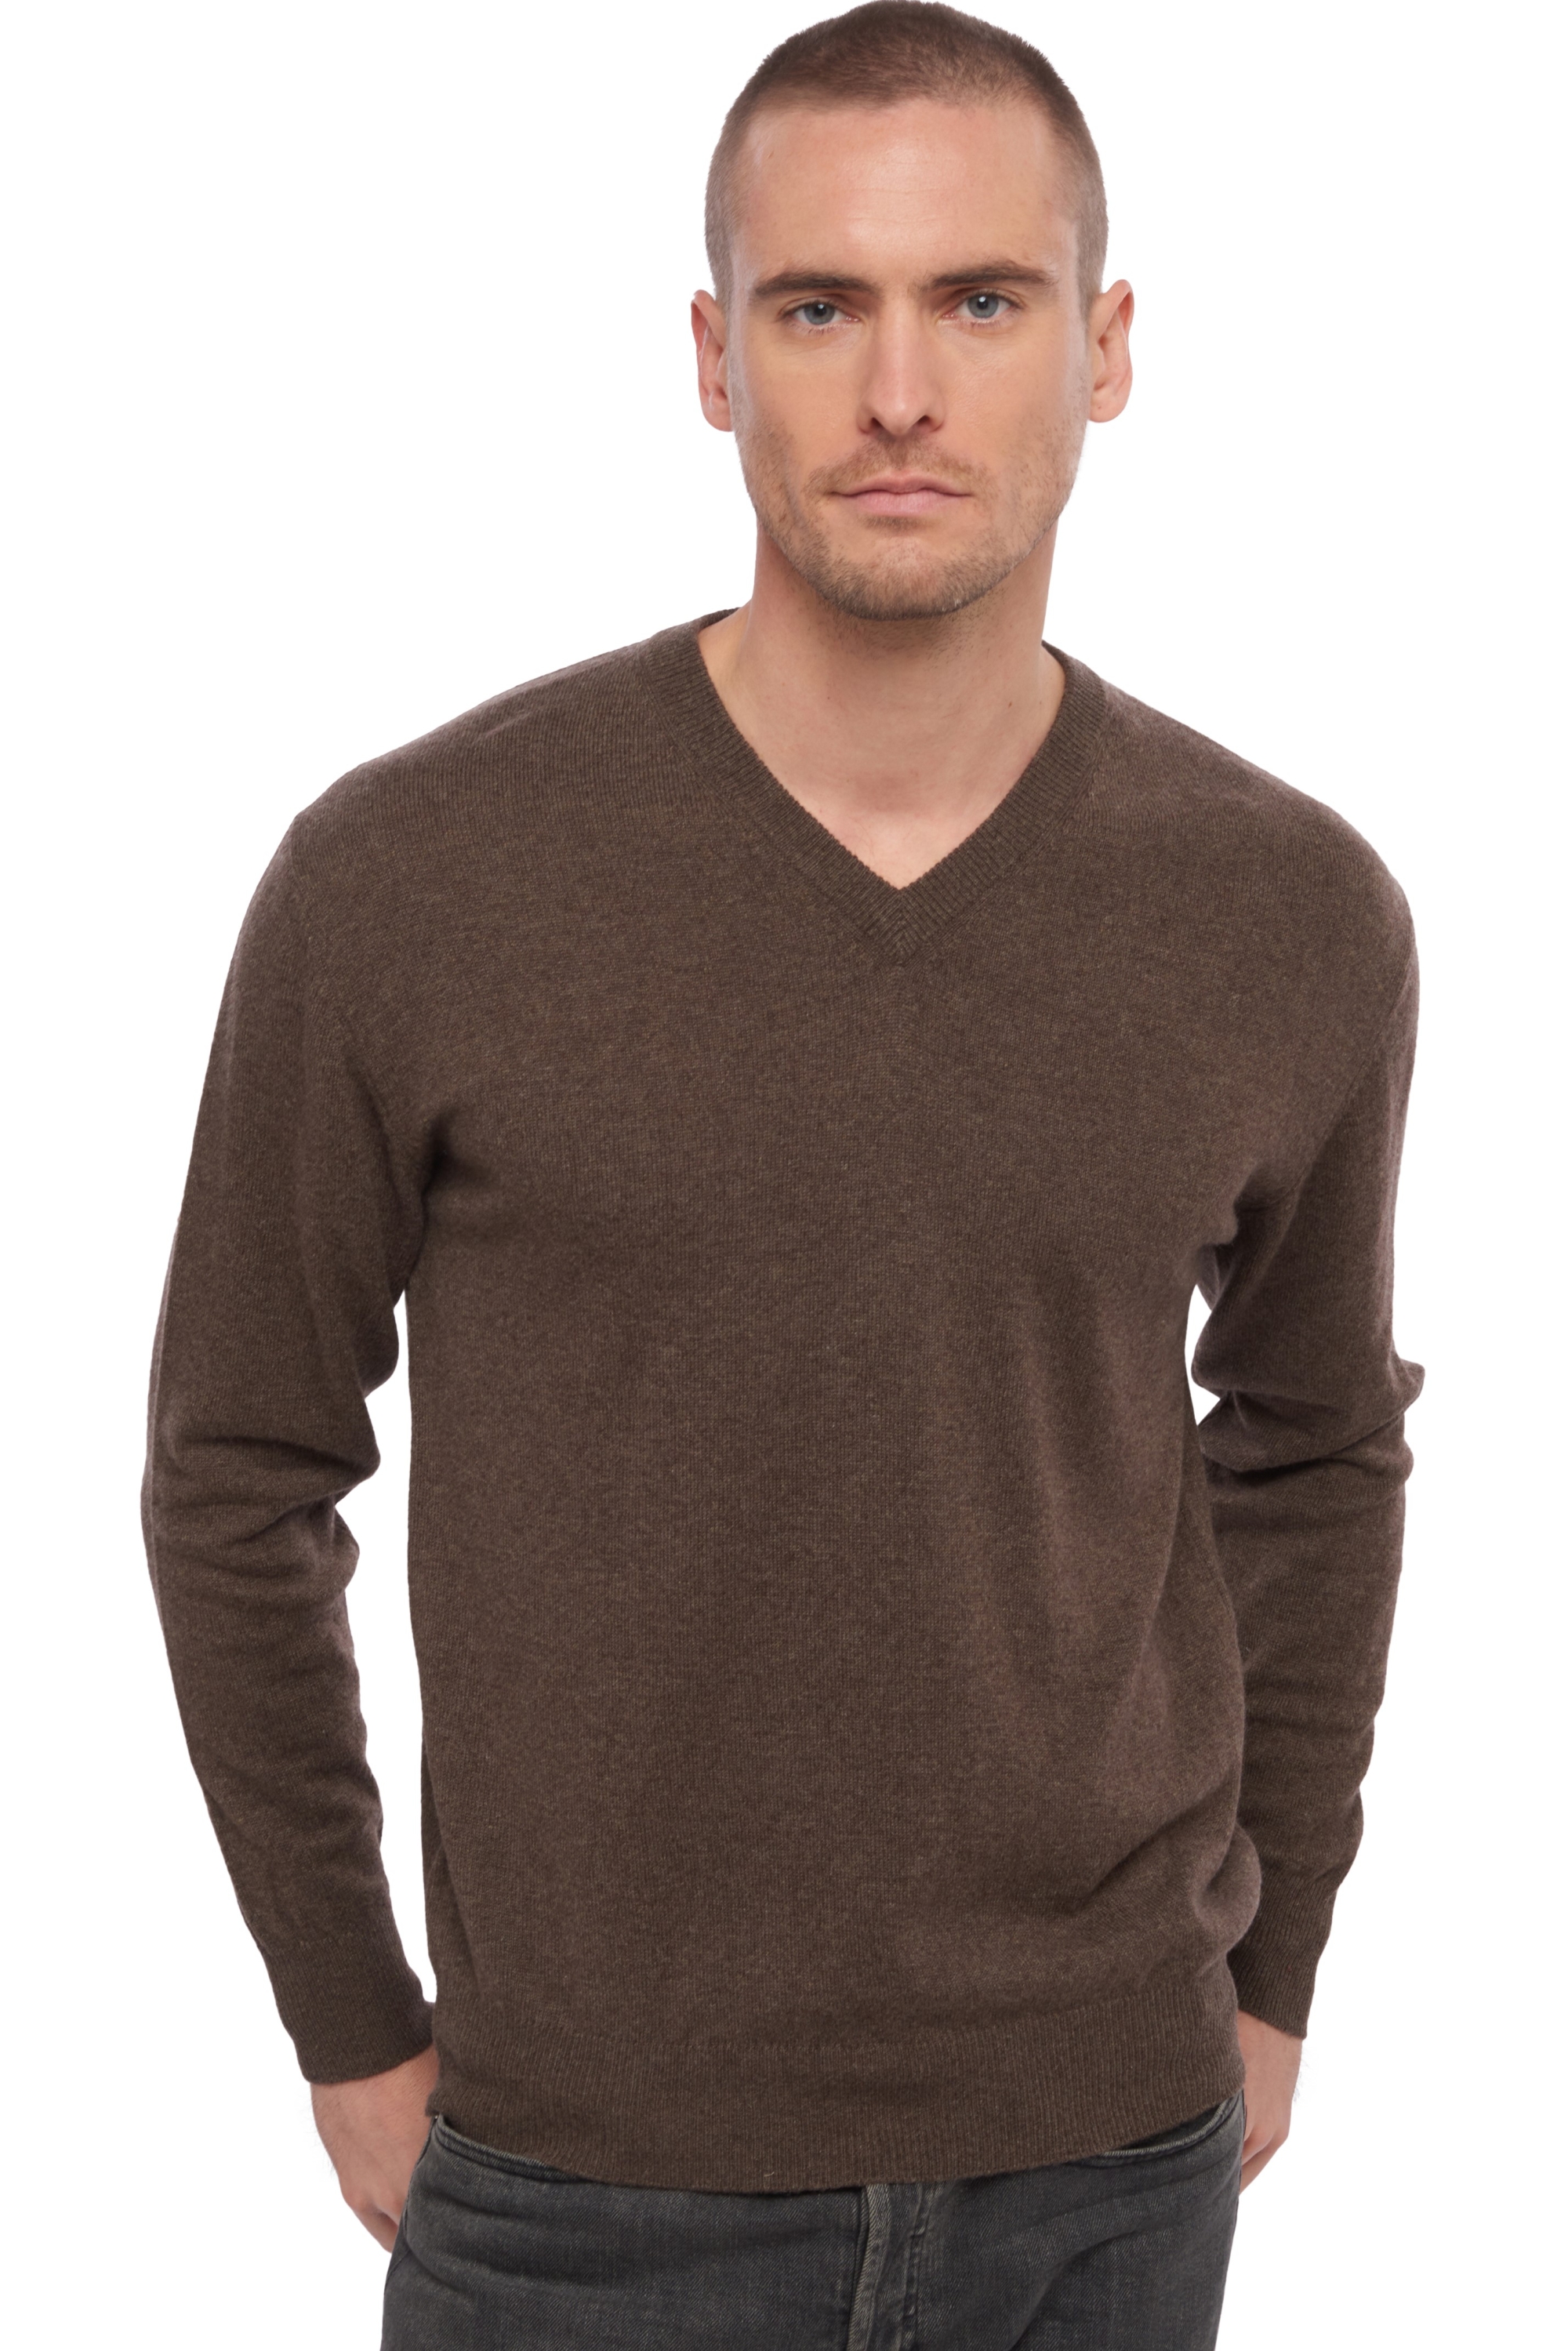 Cachemire pull homme hippolyte marron chine 4xl